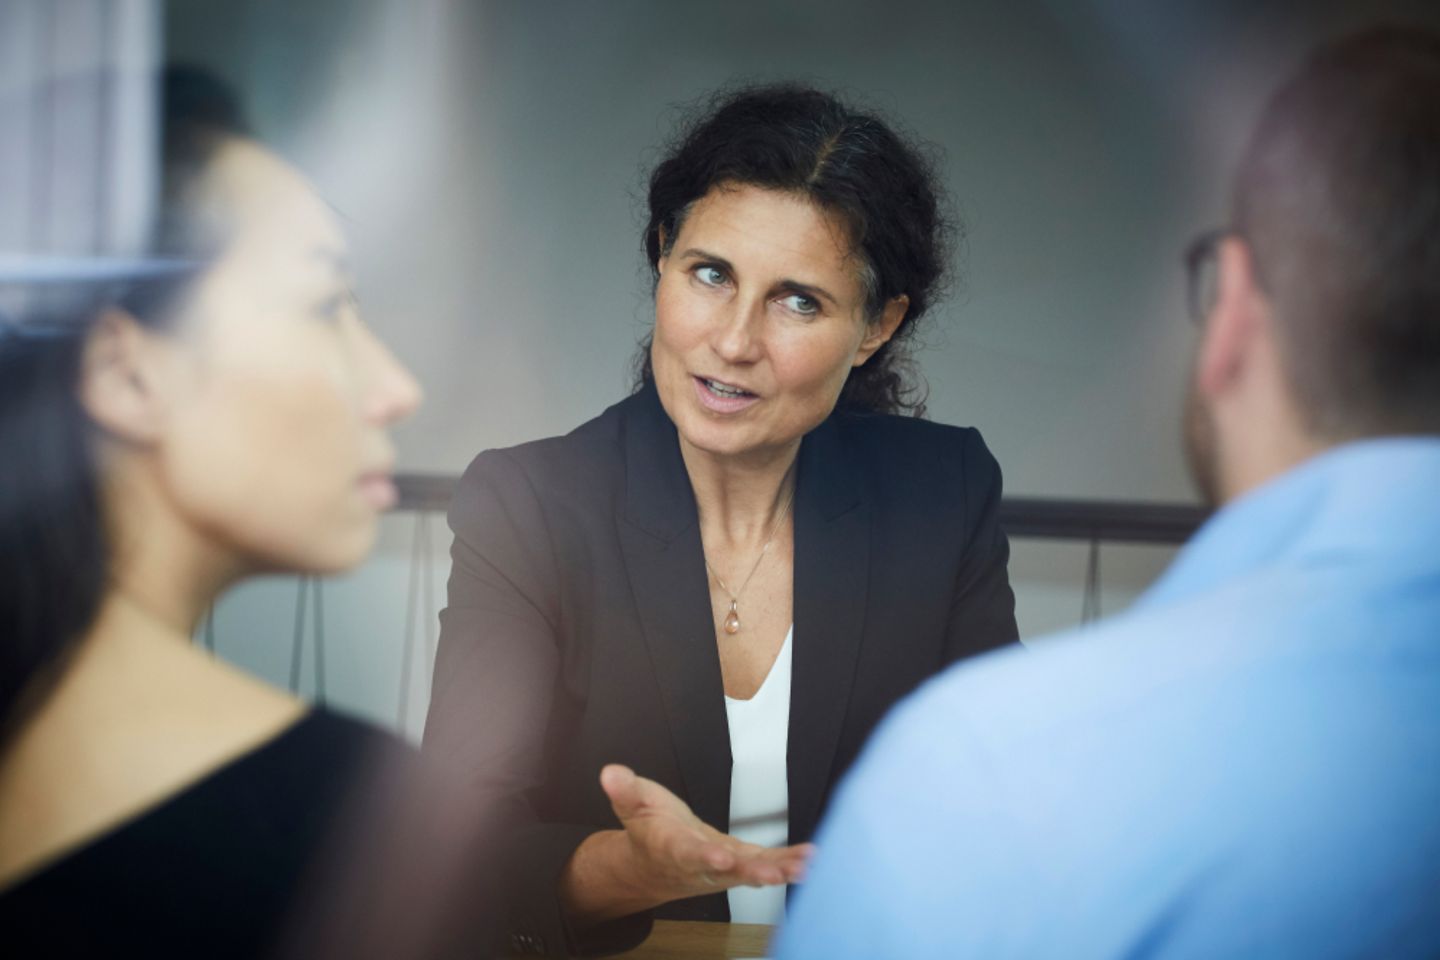  Businesswoman discussing with man and woman during meeting at office.